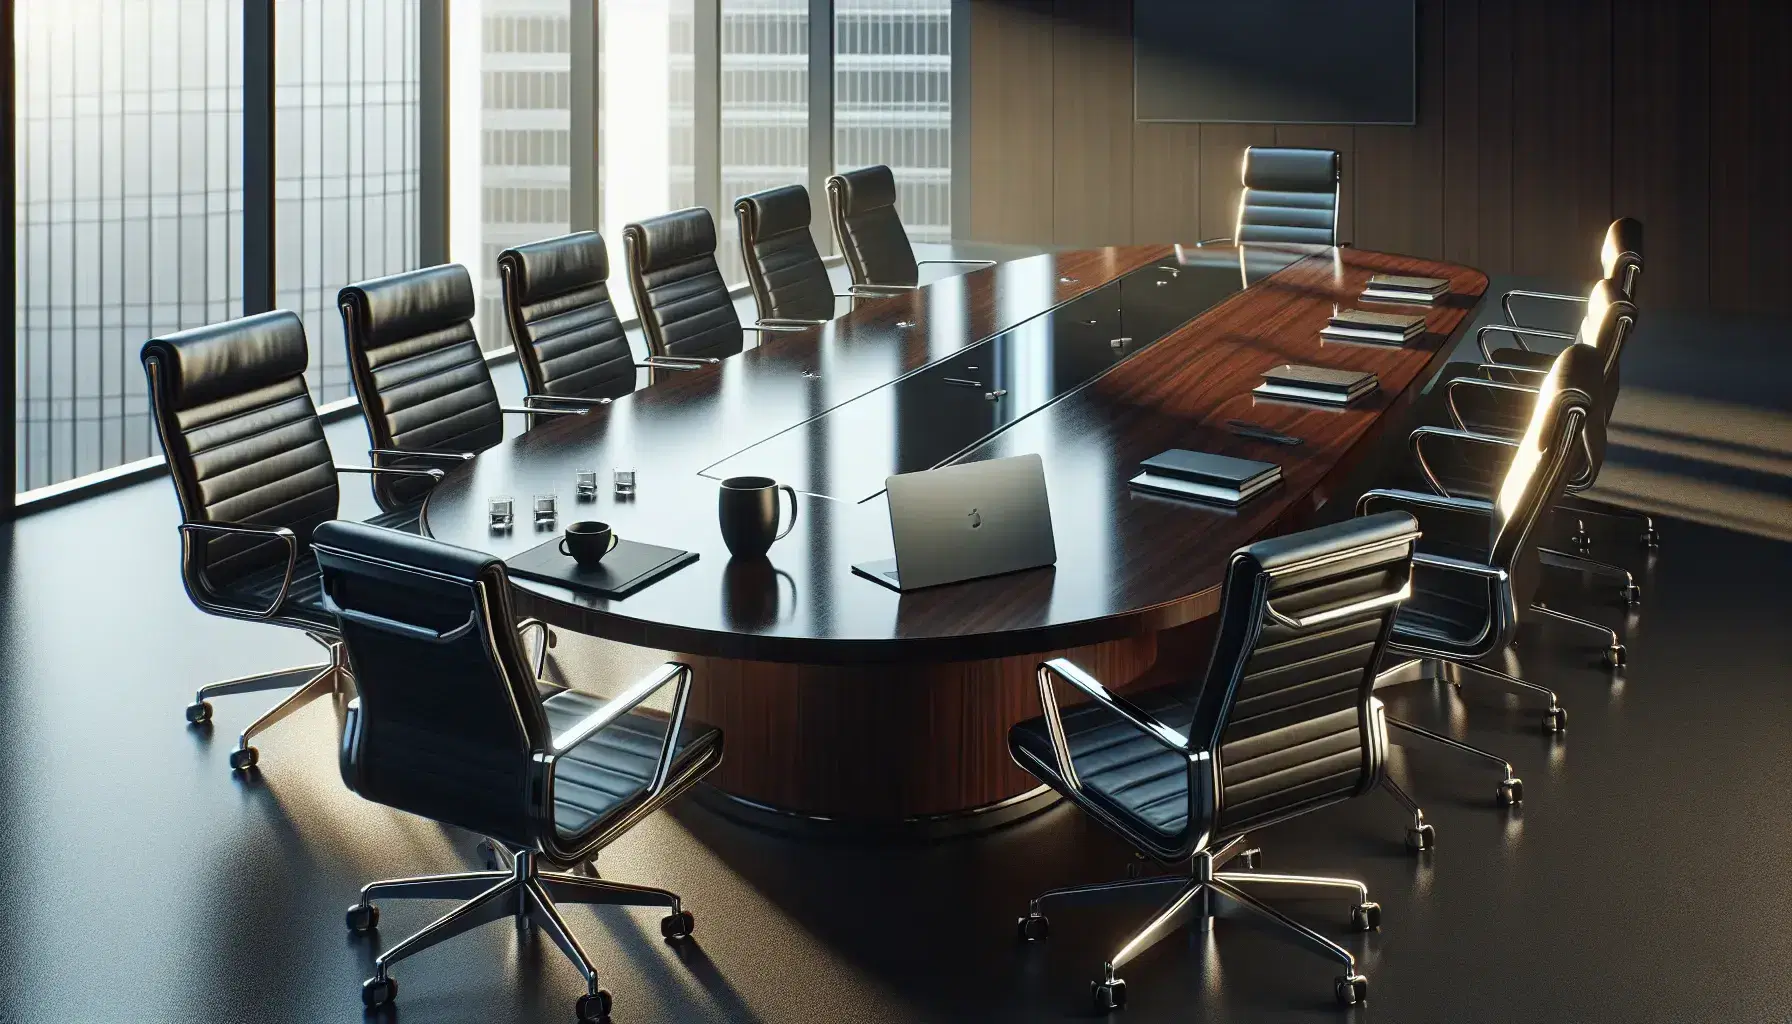 Modern boardroom with oval mahogany table, black leather chairs, laptop, and cityscape view through floor-to-ceiling window at dusk.